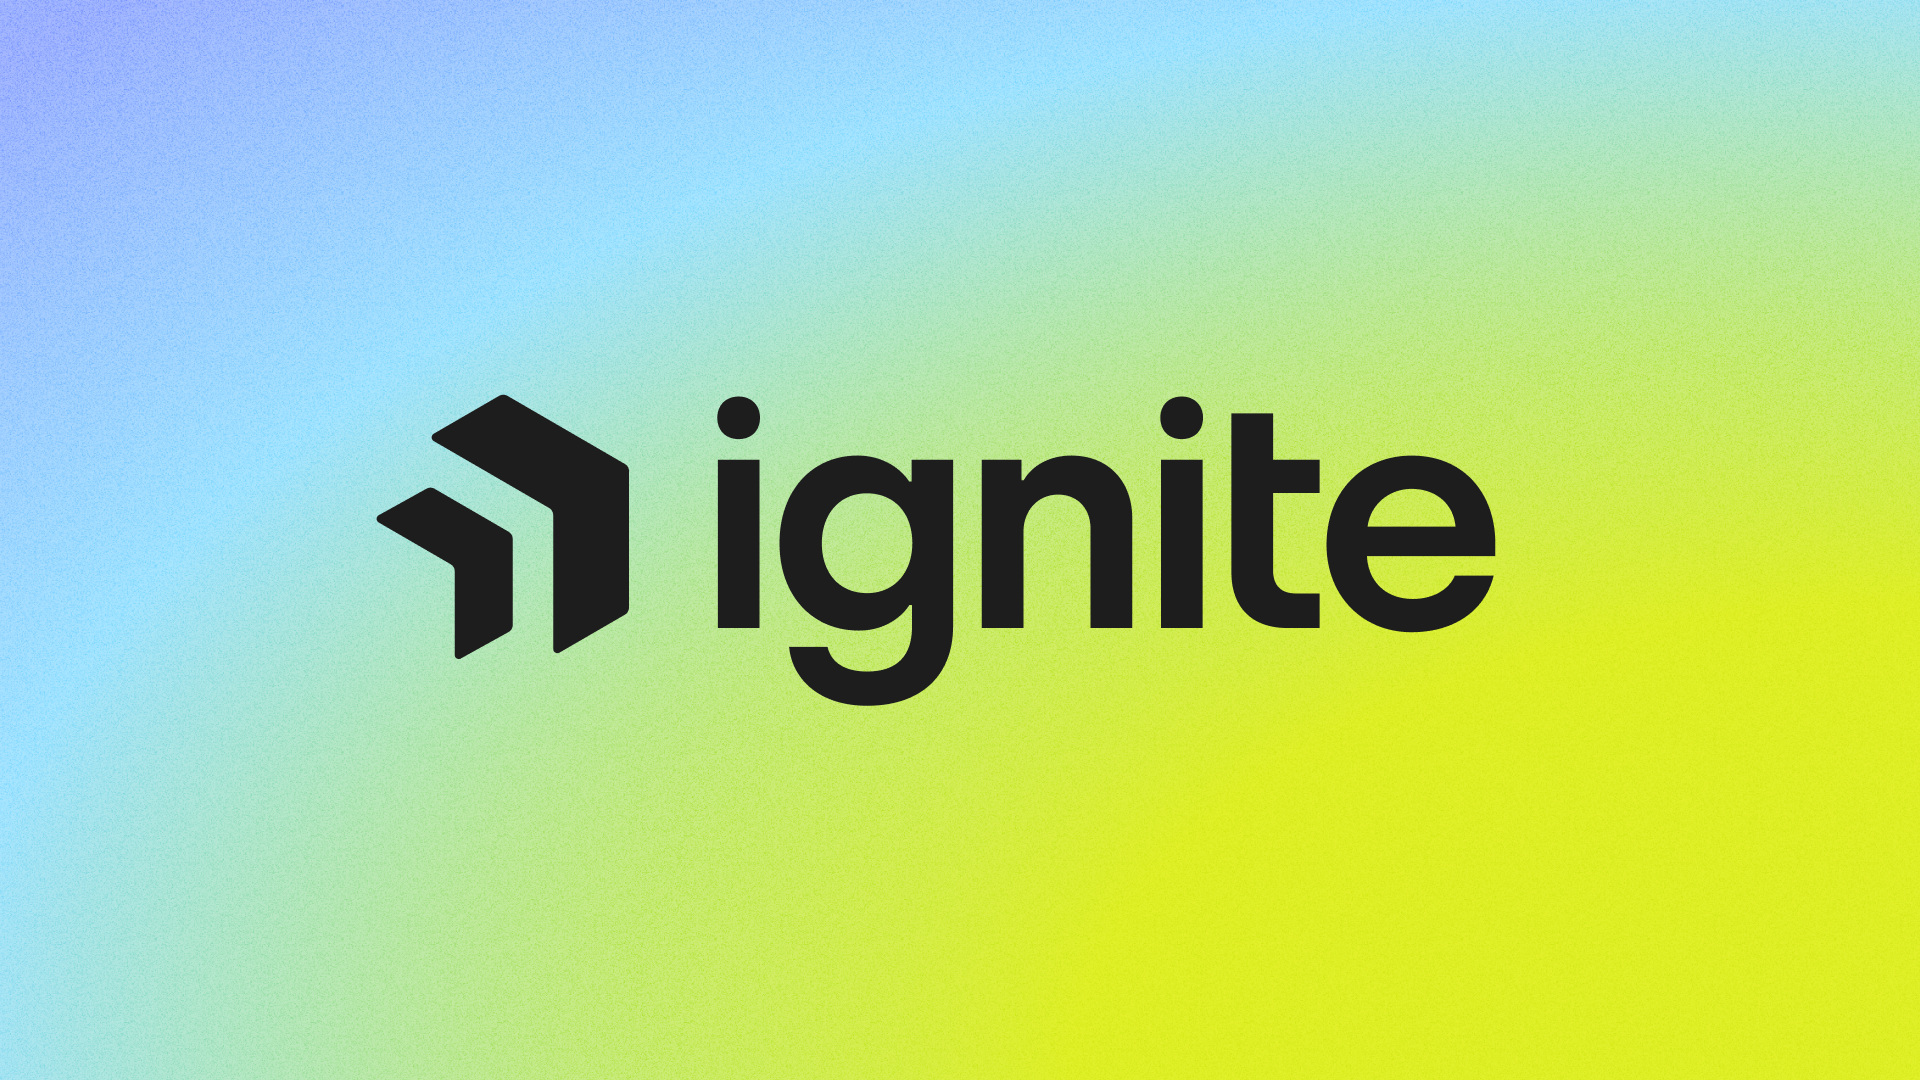 About Ignite